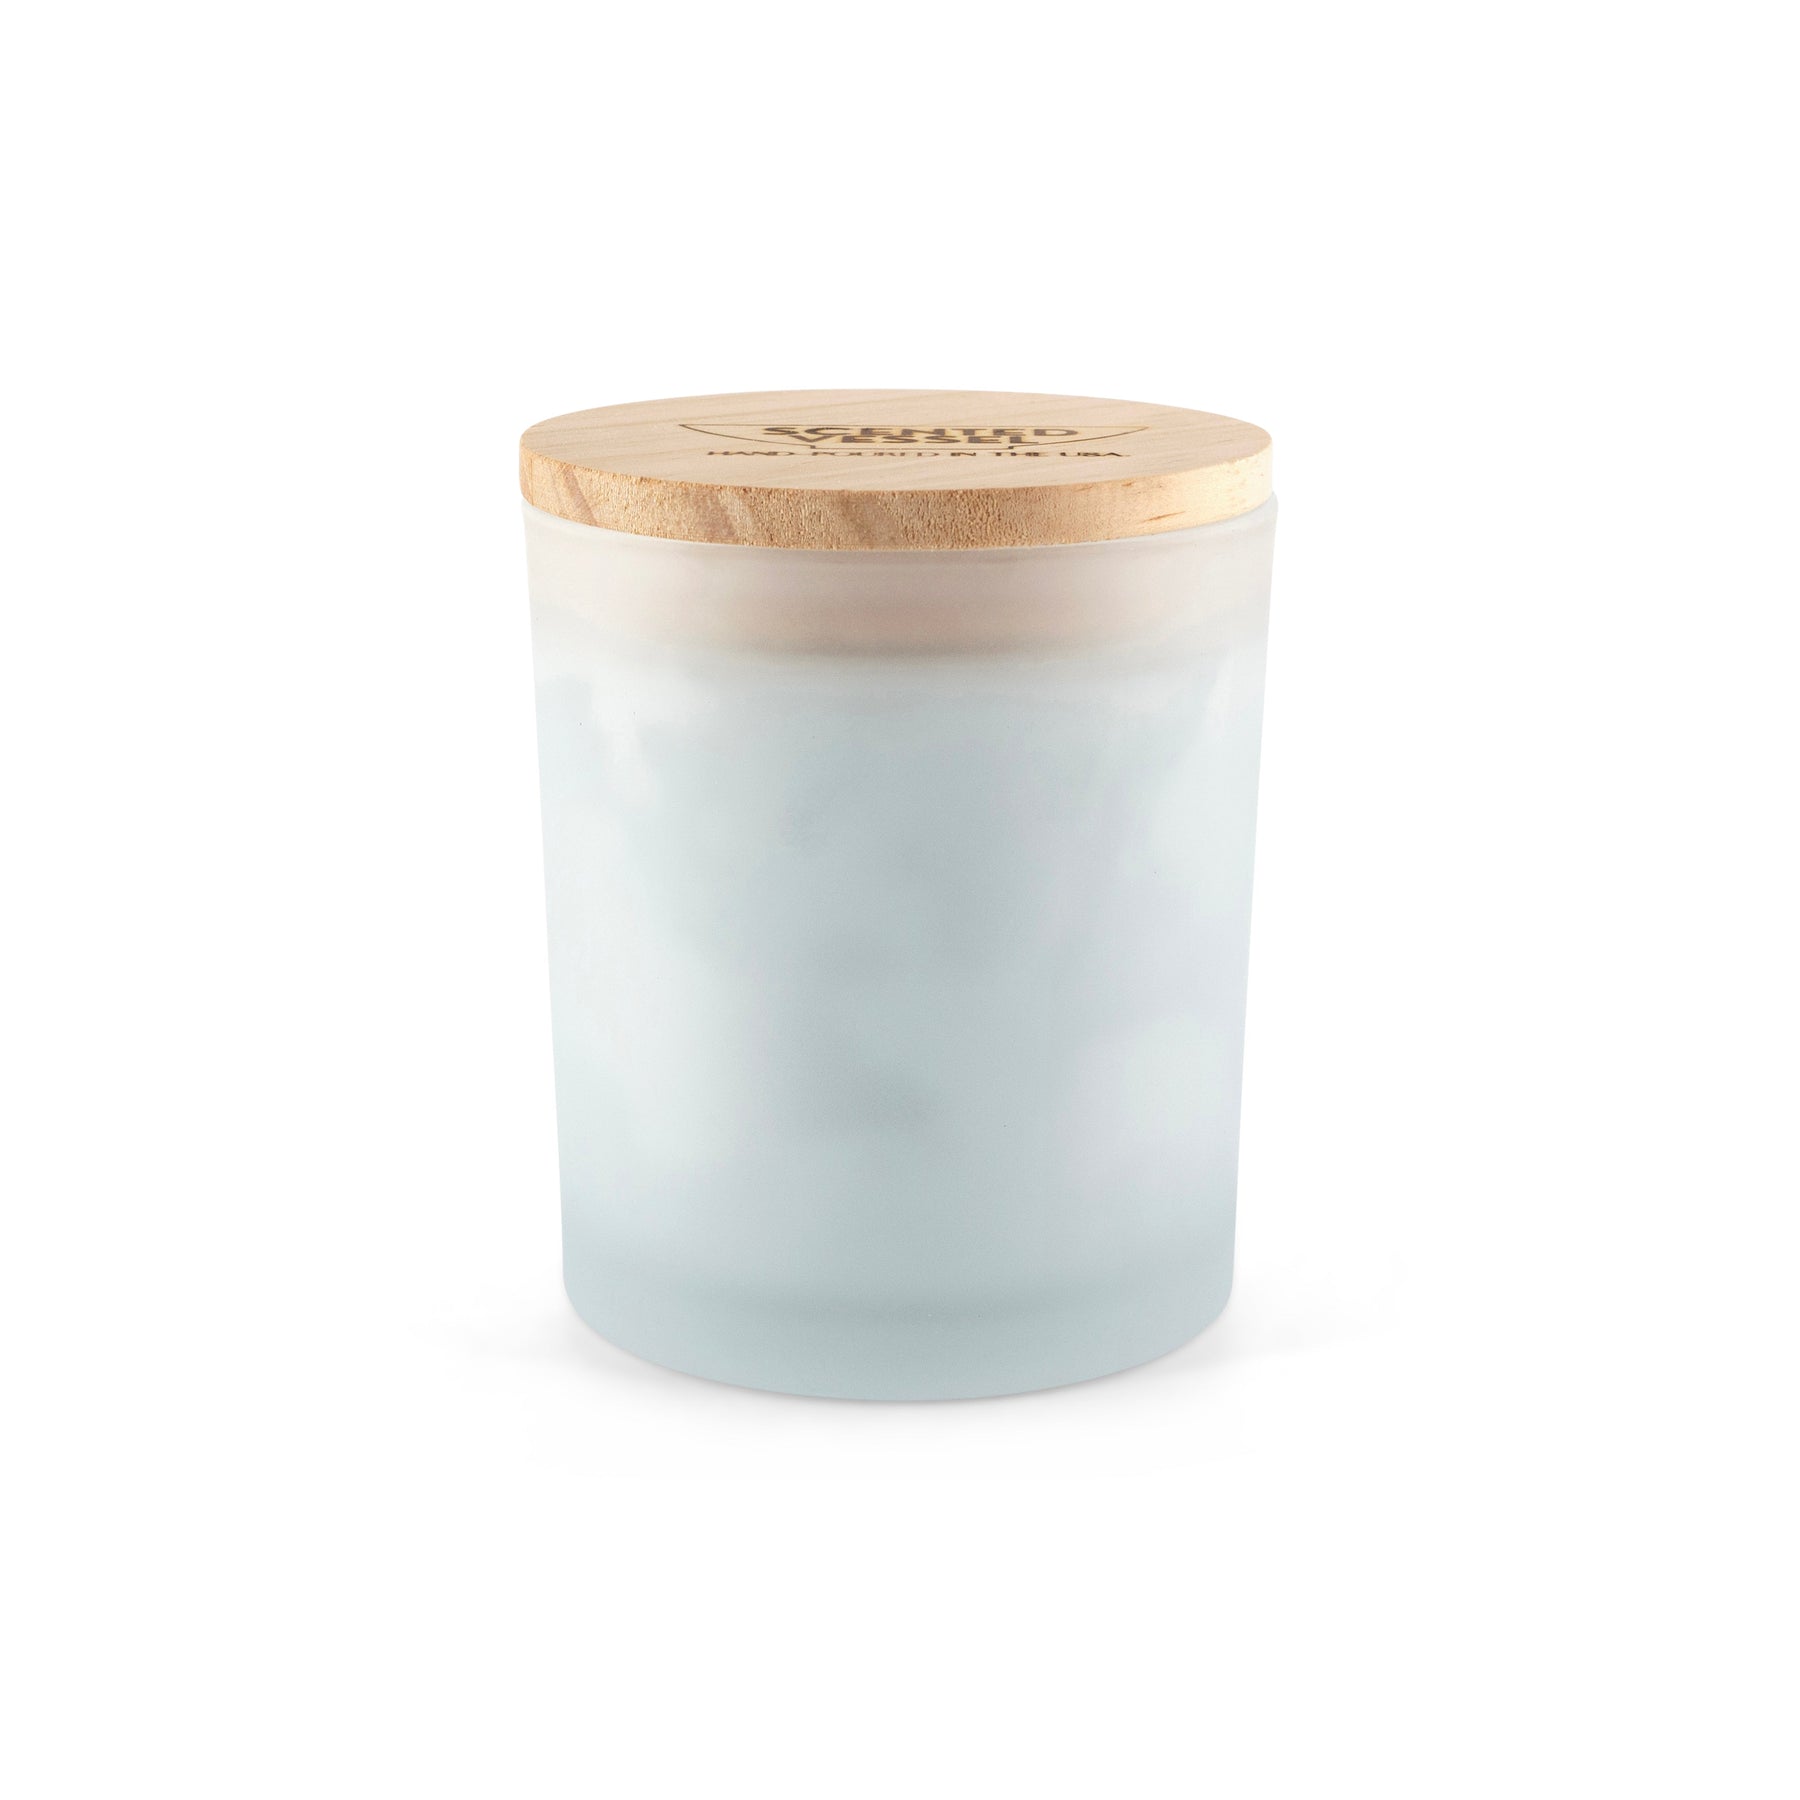 Blue Sage 7.5oz Soy Wax Blend Candle by Scented Vessel